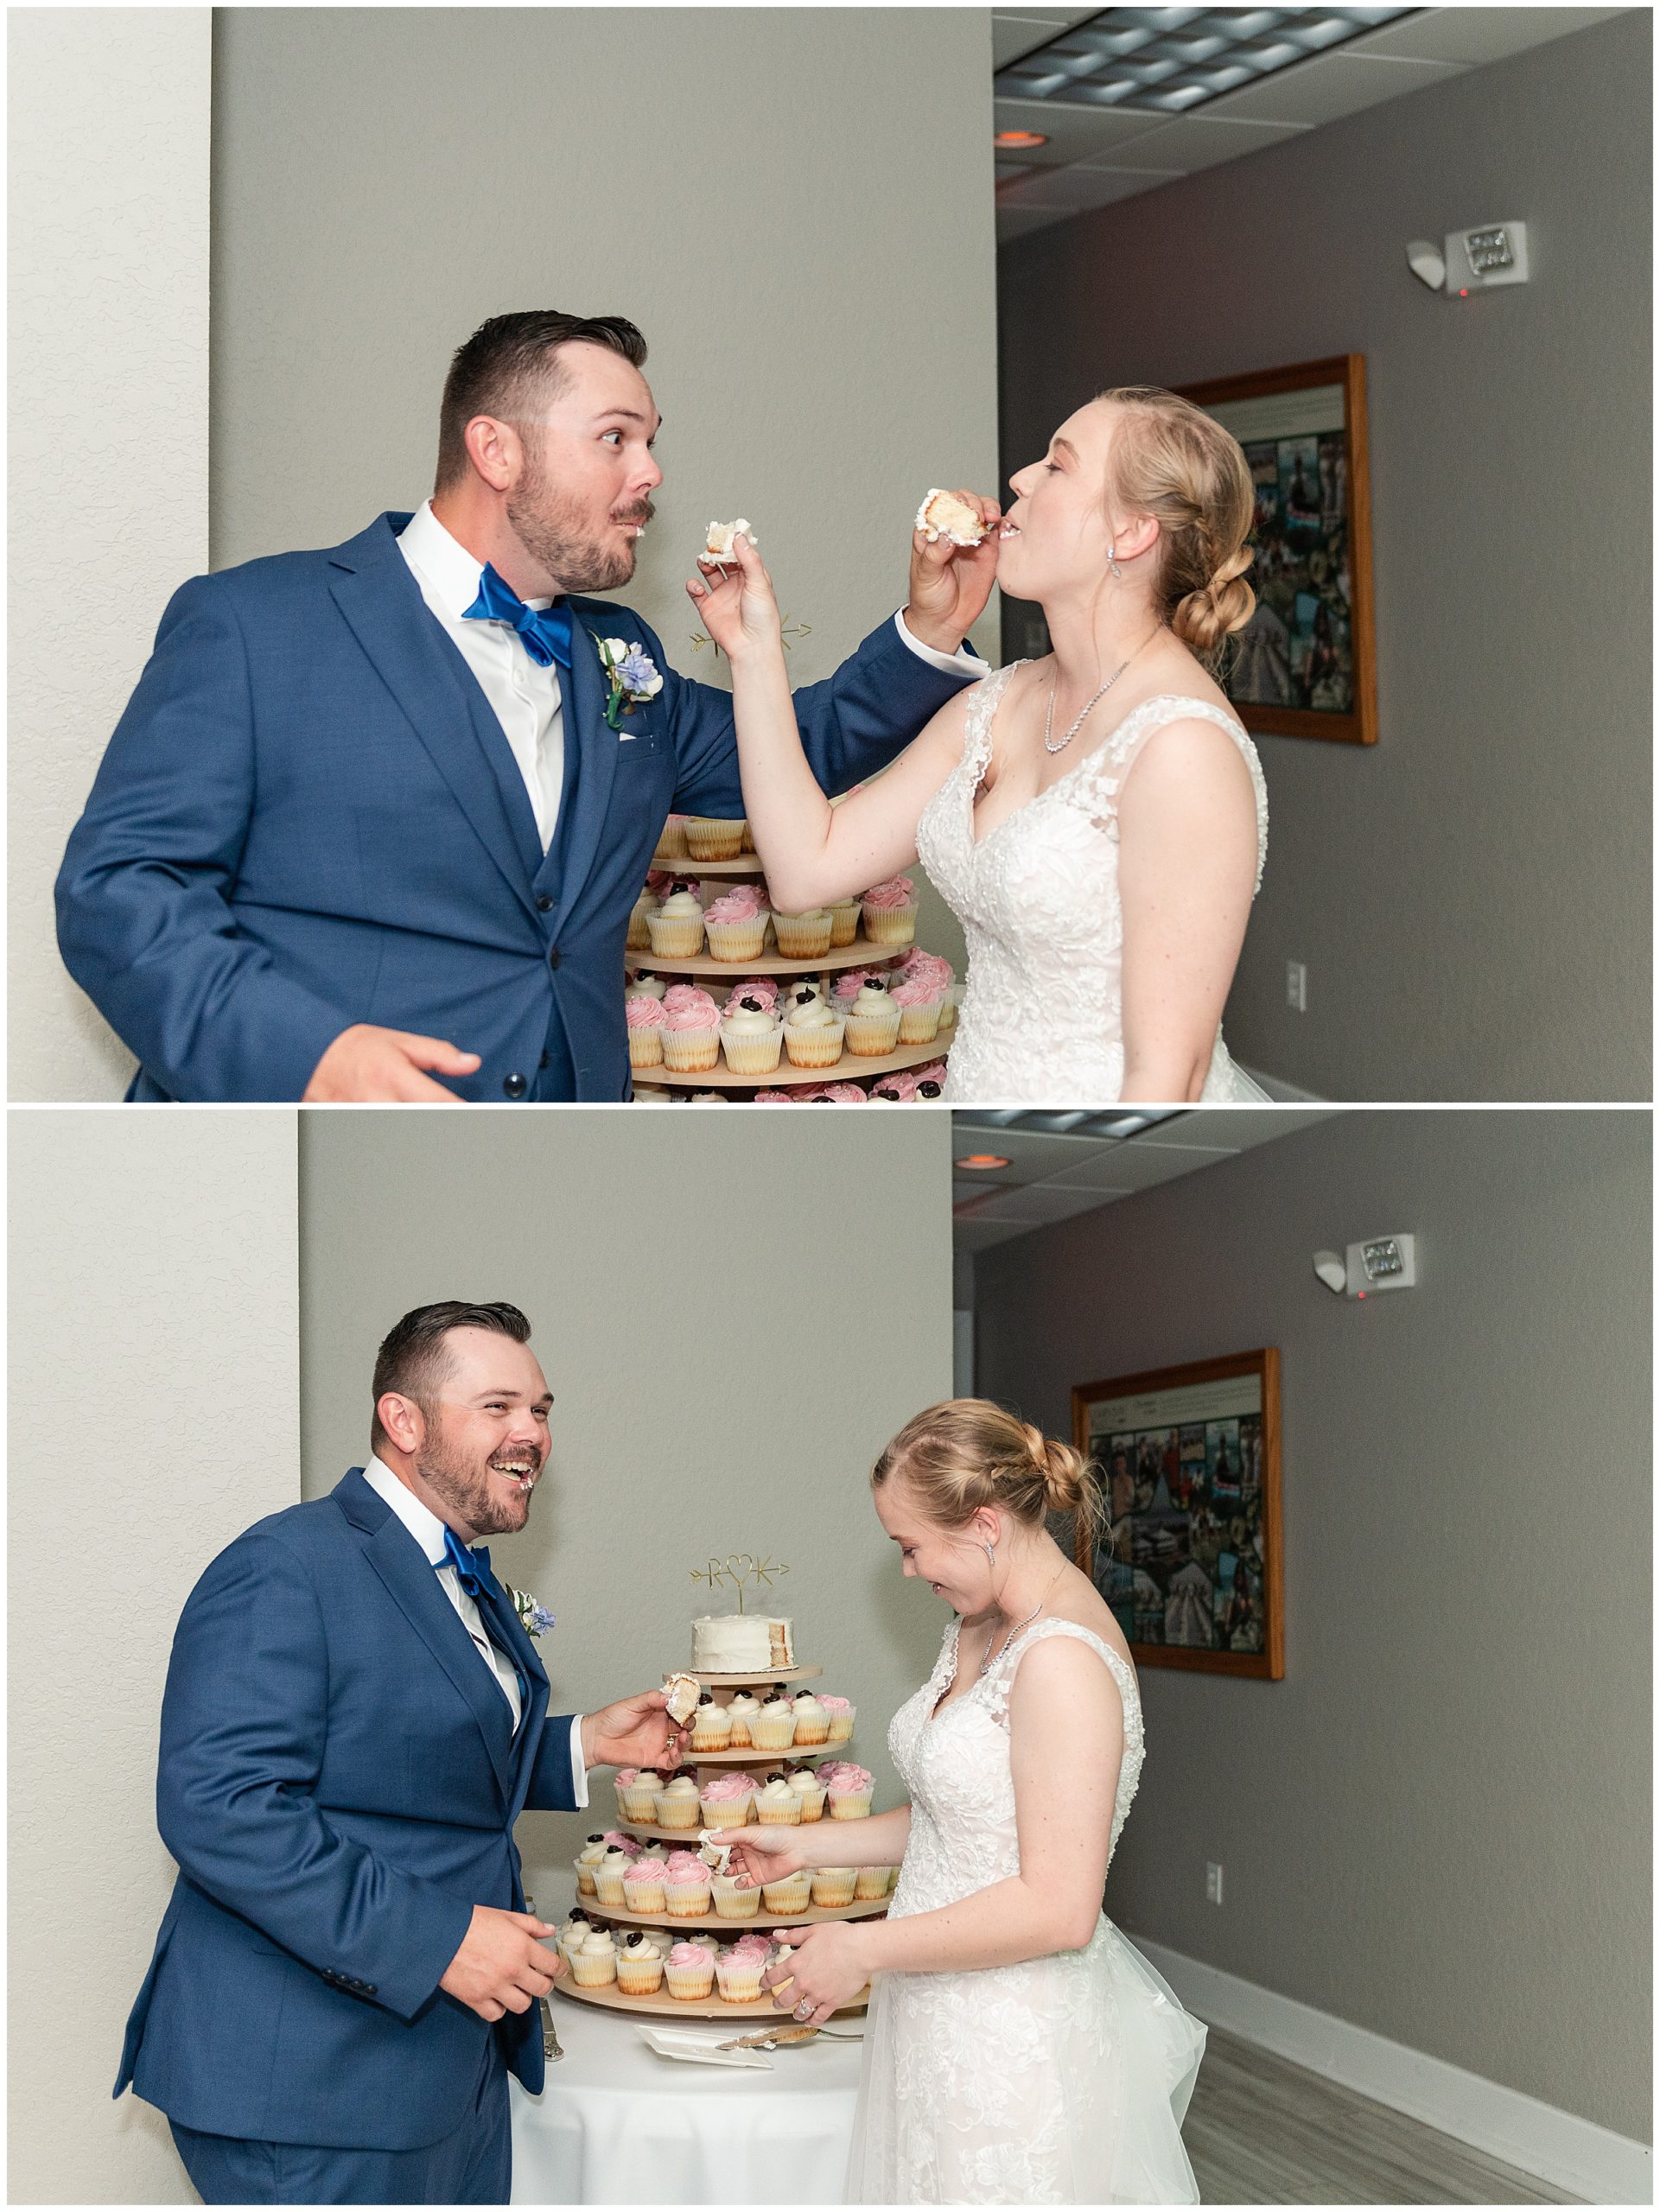 Bride and groom feeding each other a piece of their wedding cake